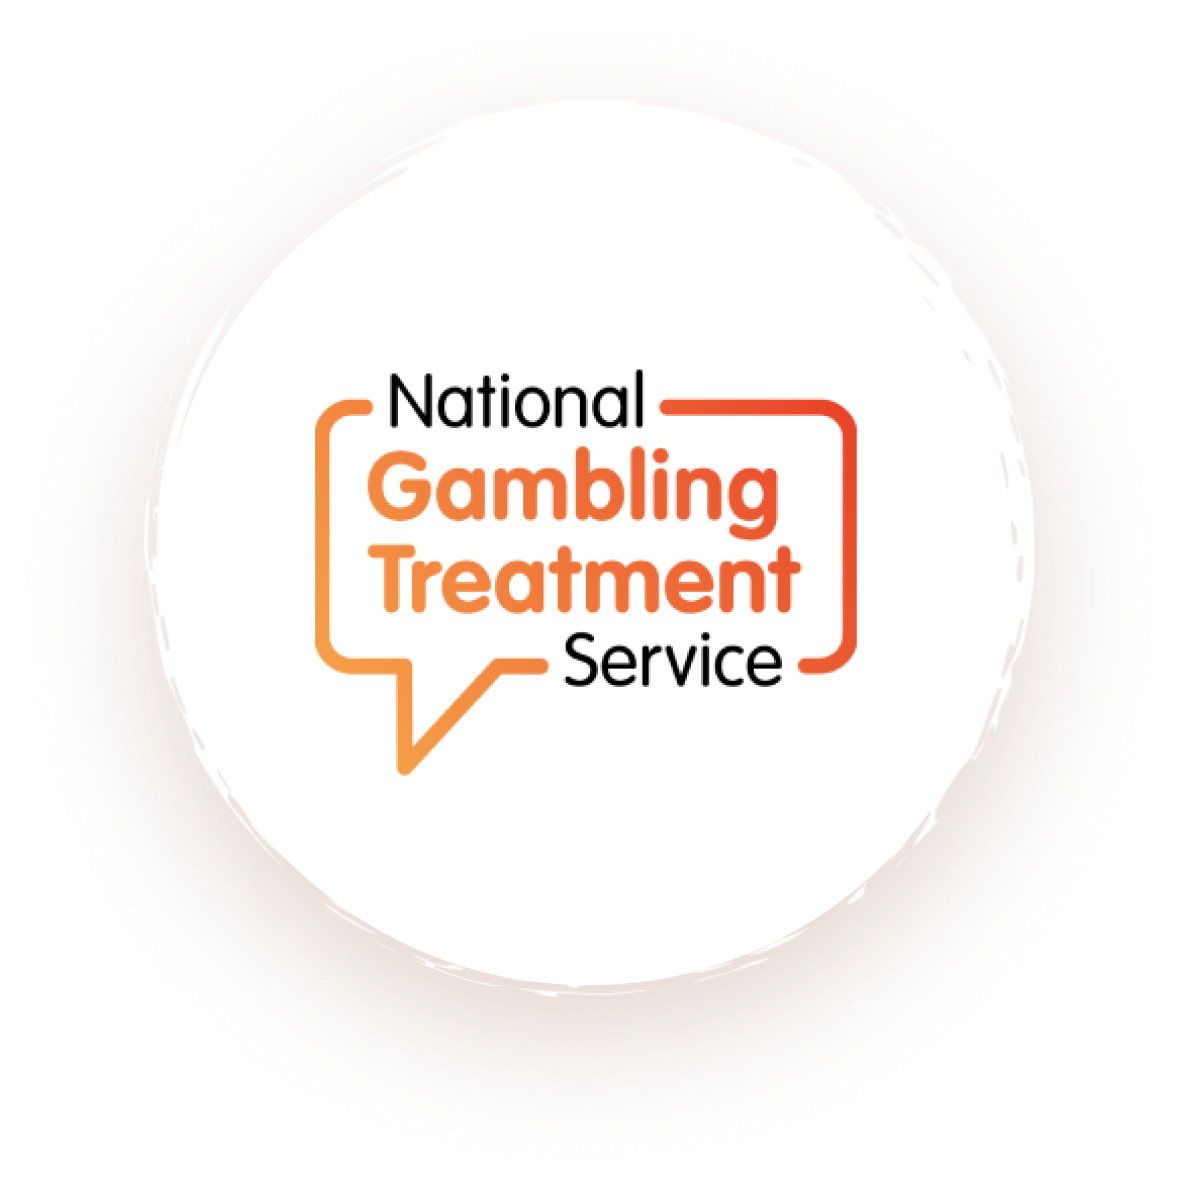 Logo for the 'National Gambling Treatment Service' with a white circular background